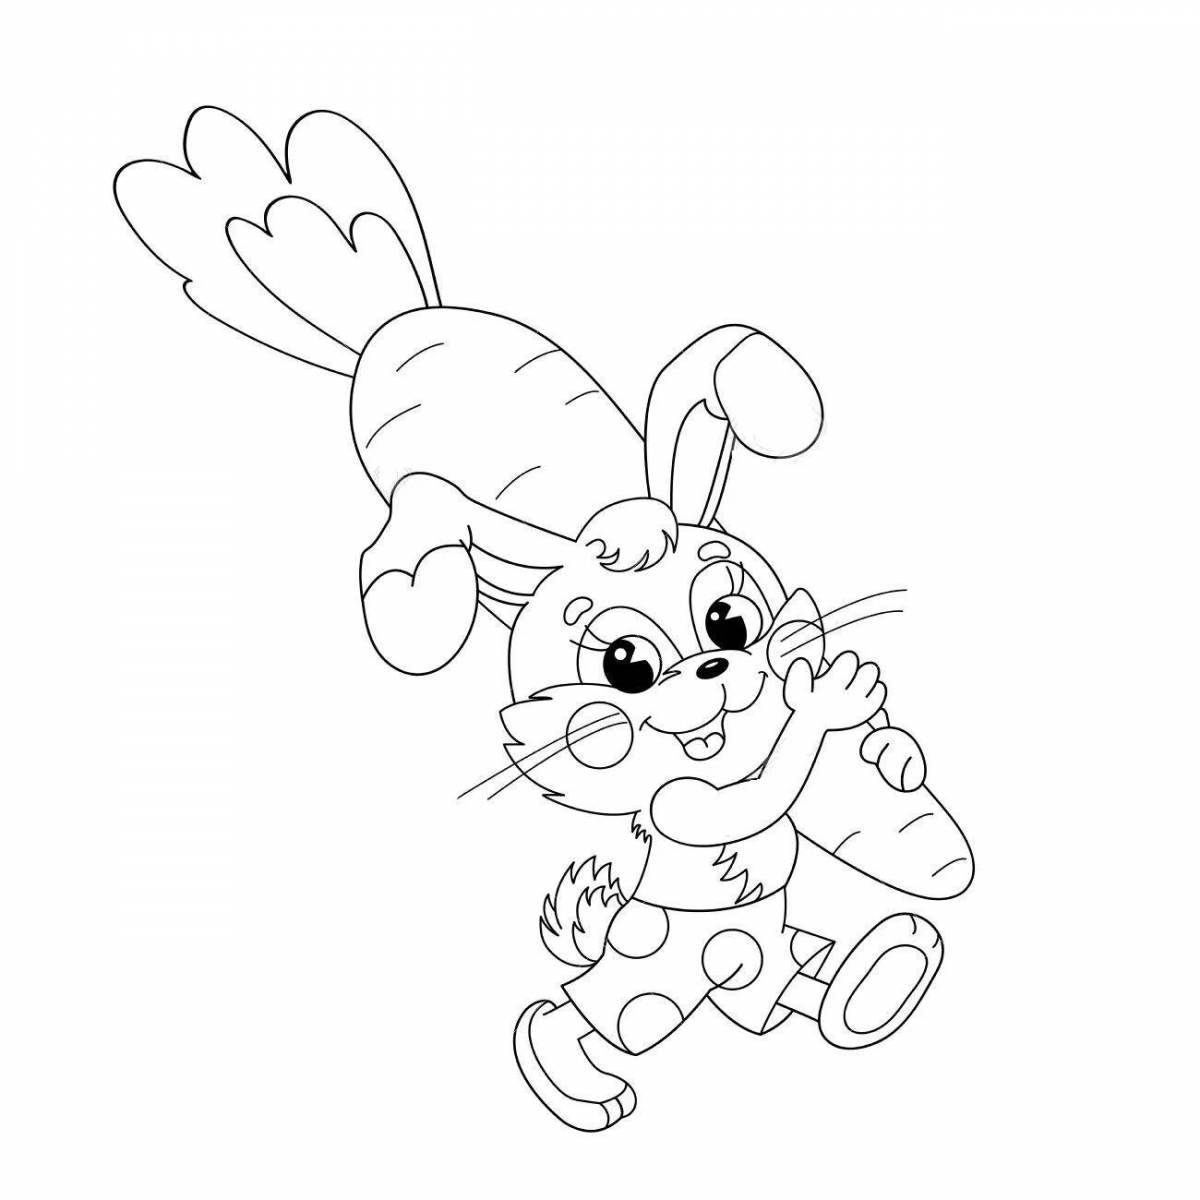 Coloring page stimulating bunny with carrots